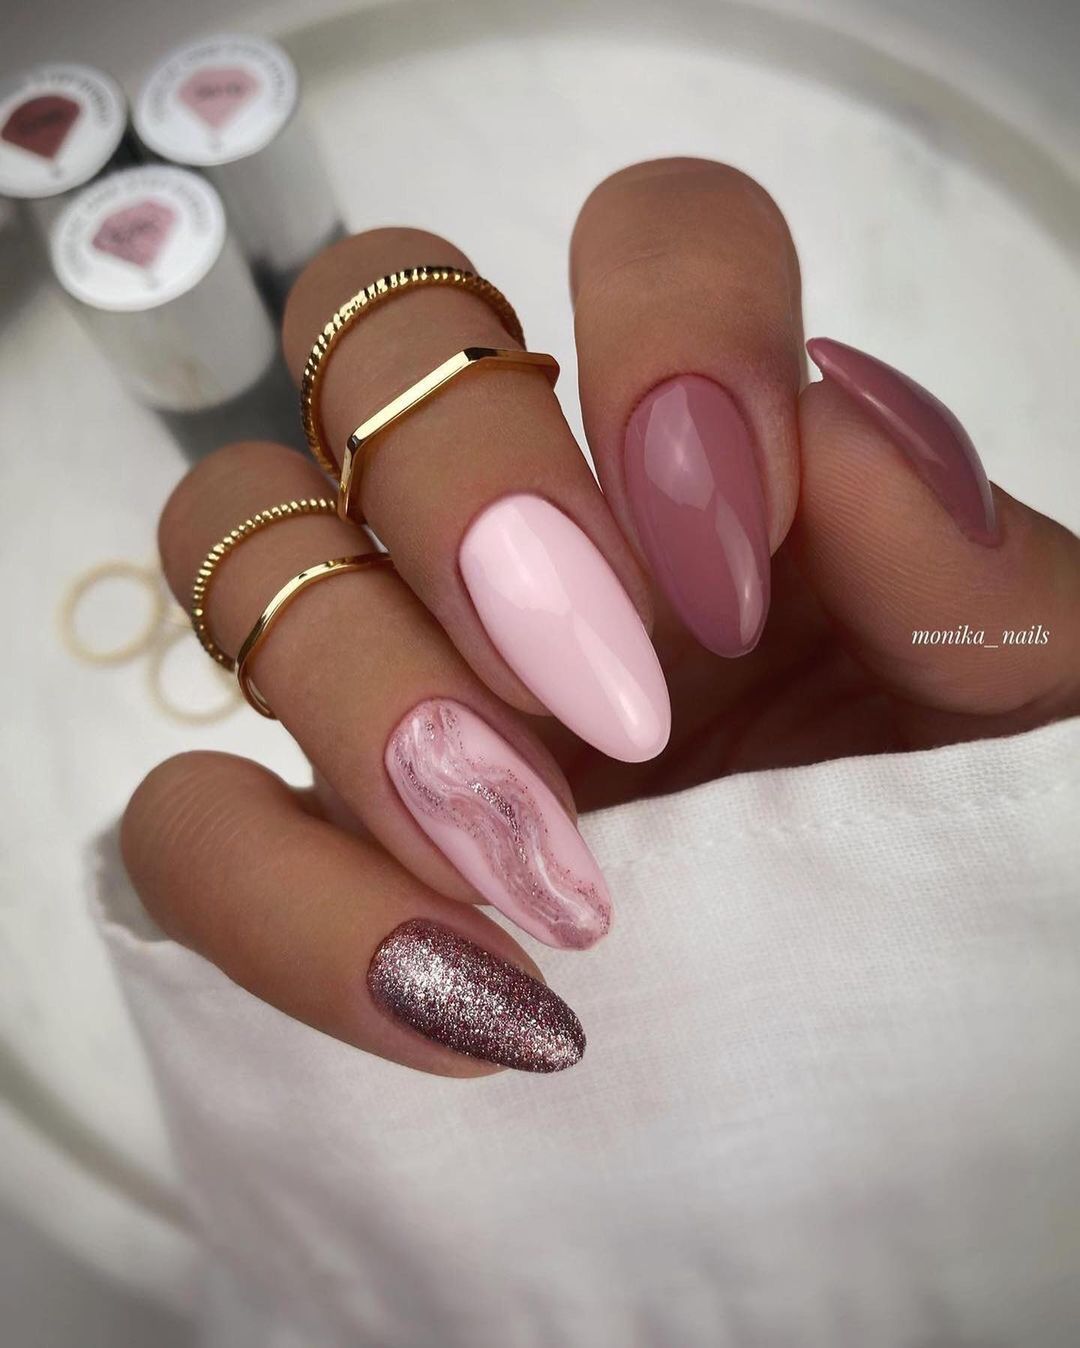 50+ Fall Nail Ideas You’re Going To Obsess Over images 14